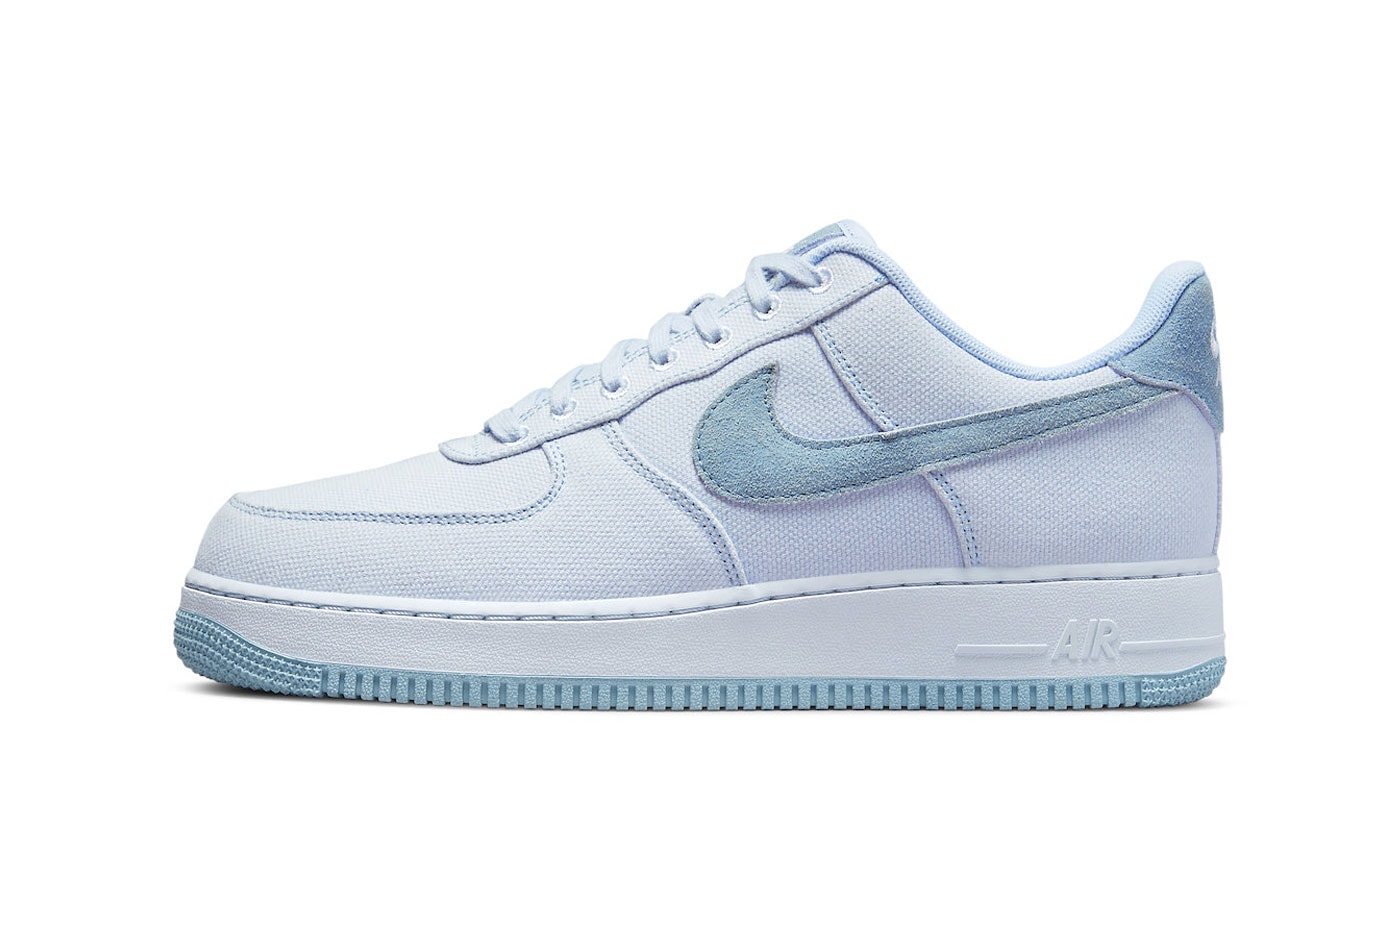 Nike Air Force 1 low blue dye DQ8233-001 2022 suede leather rubber swoosh diy release info